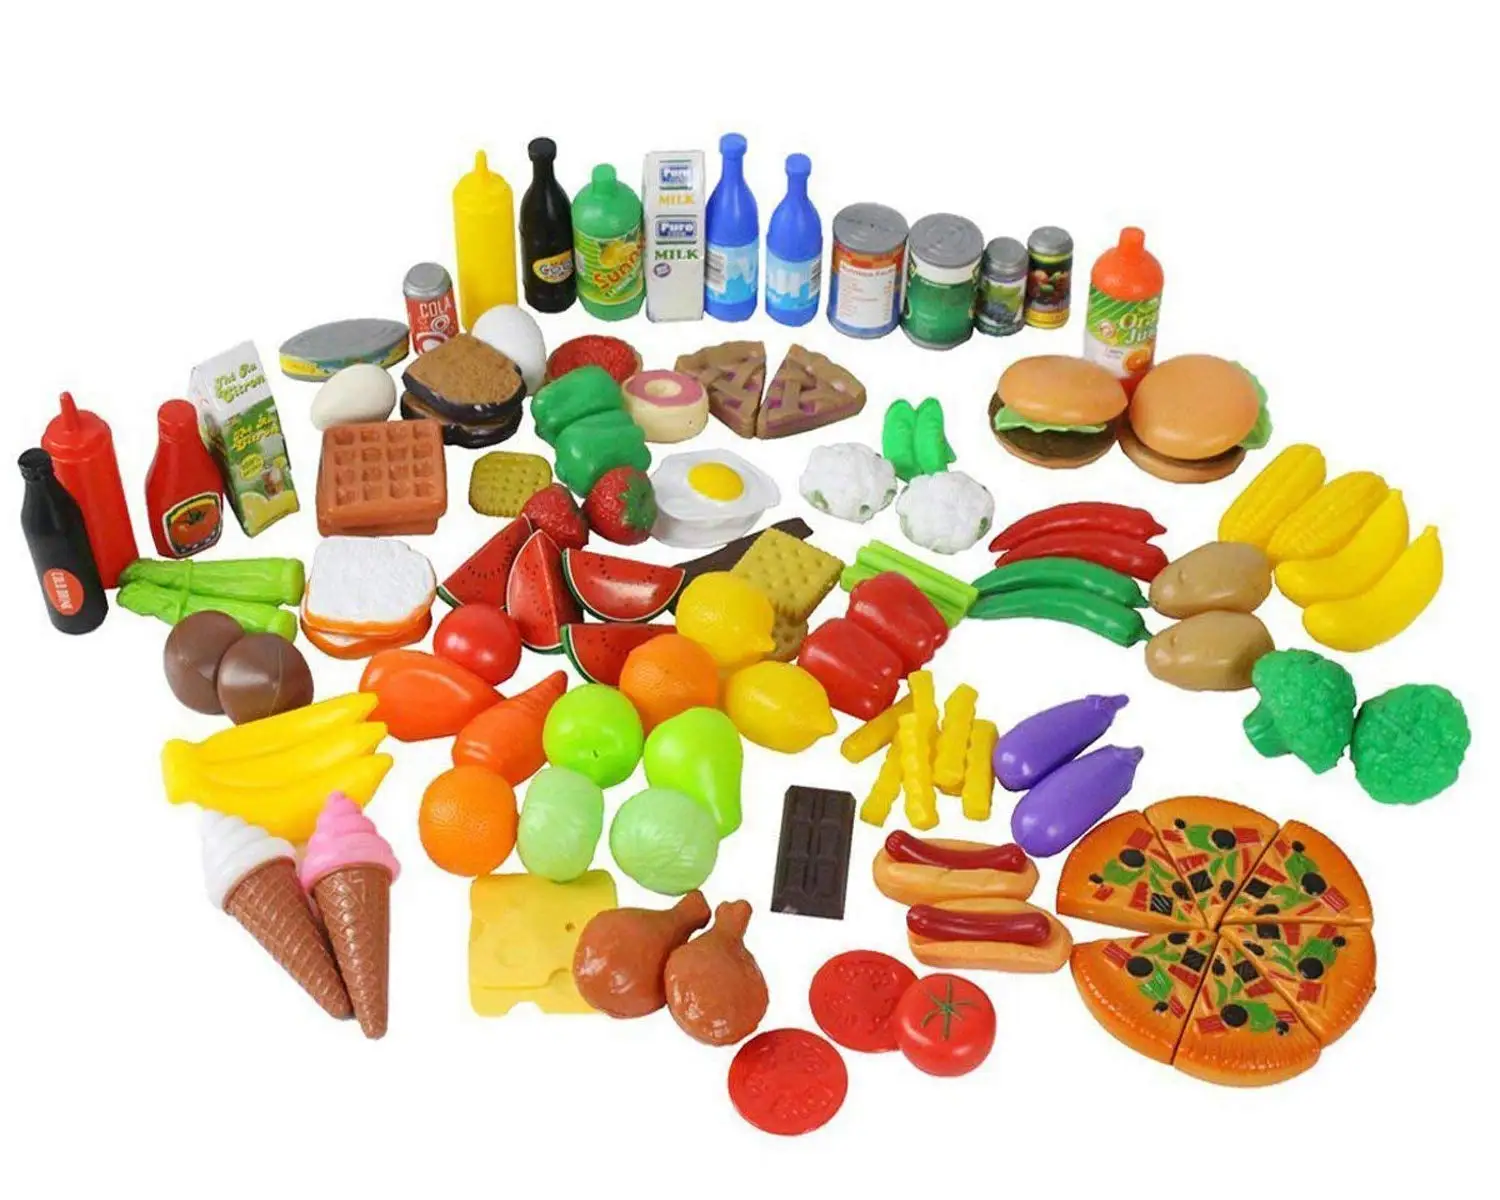 children's play food for kitchens